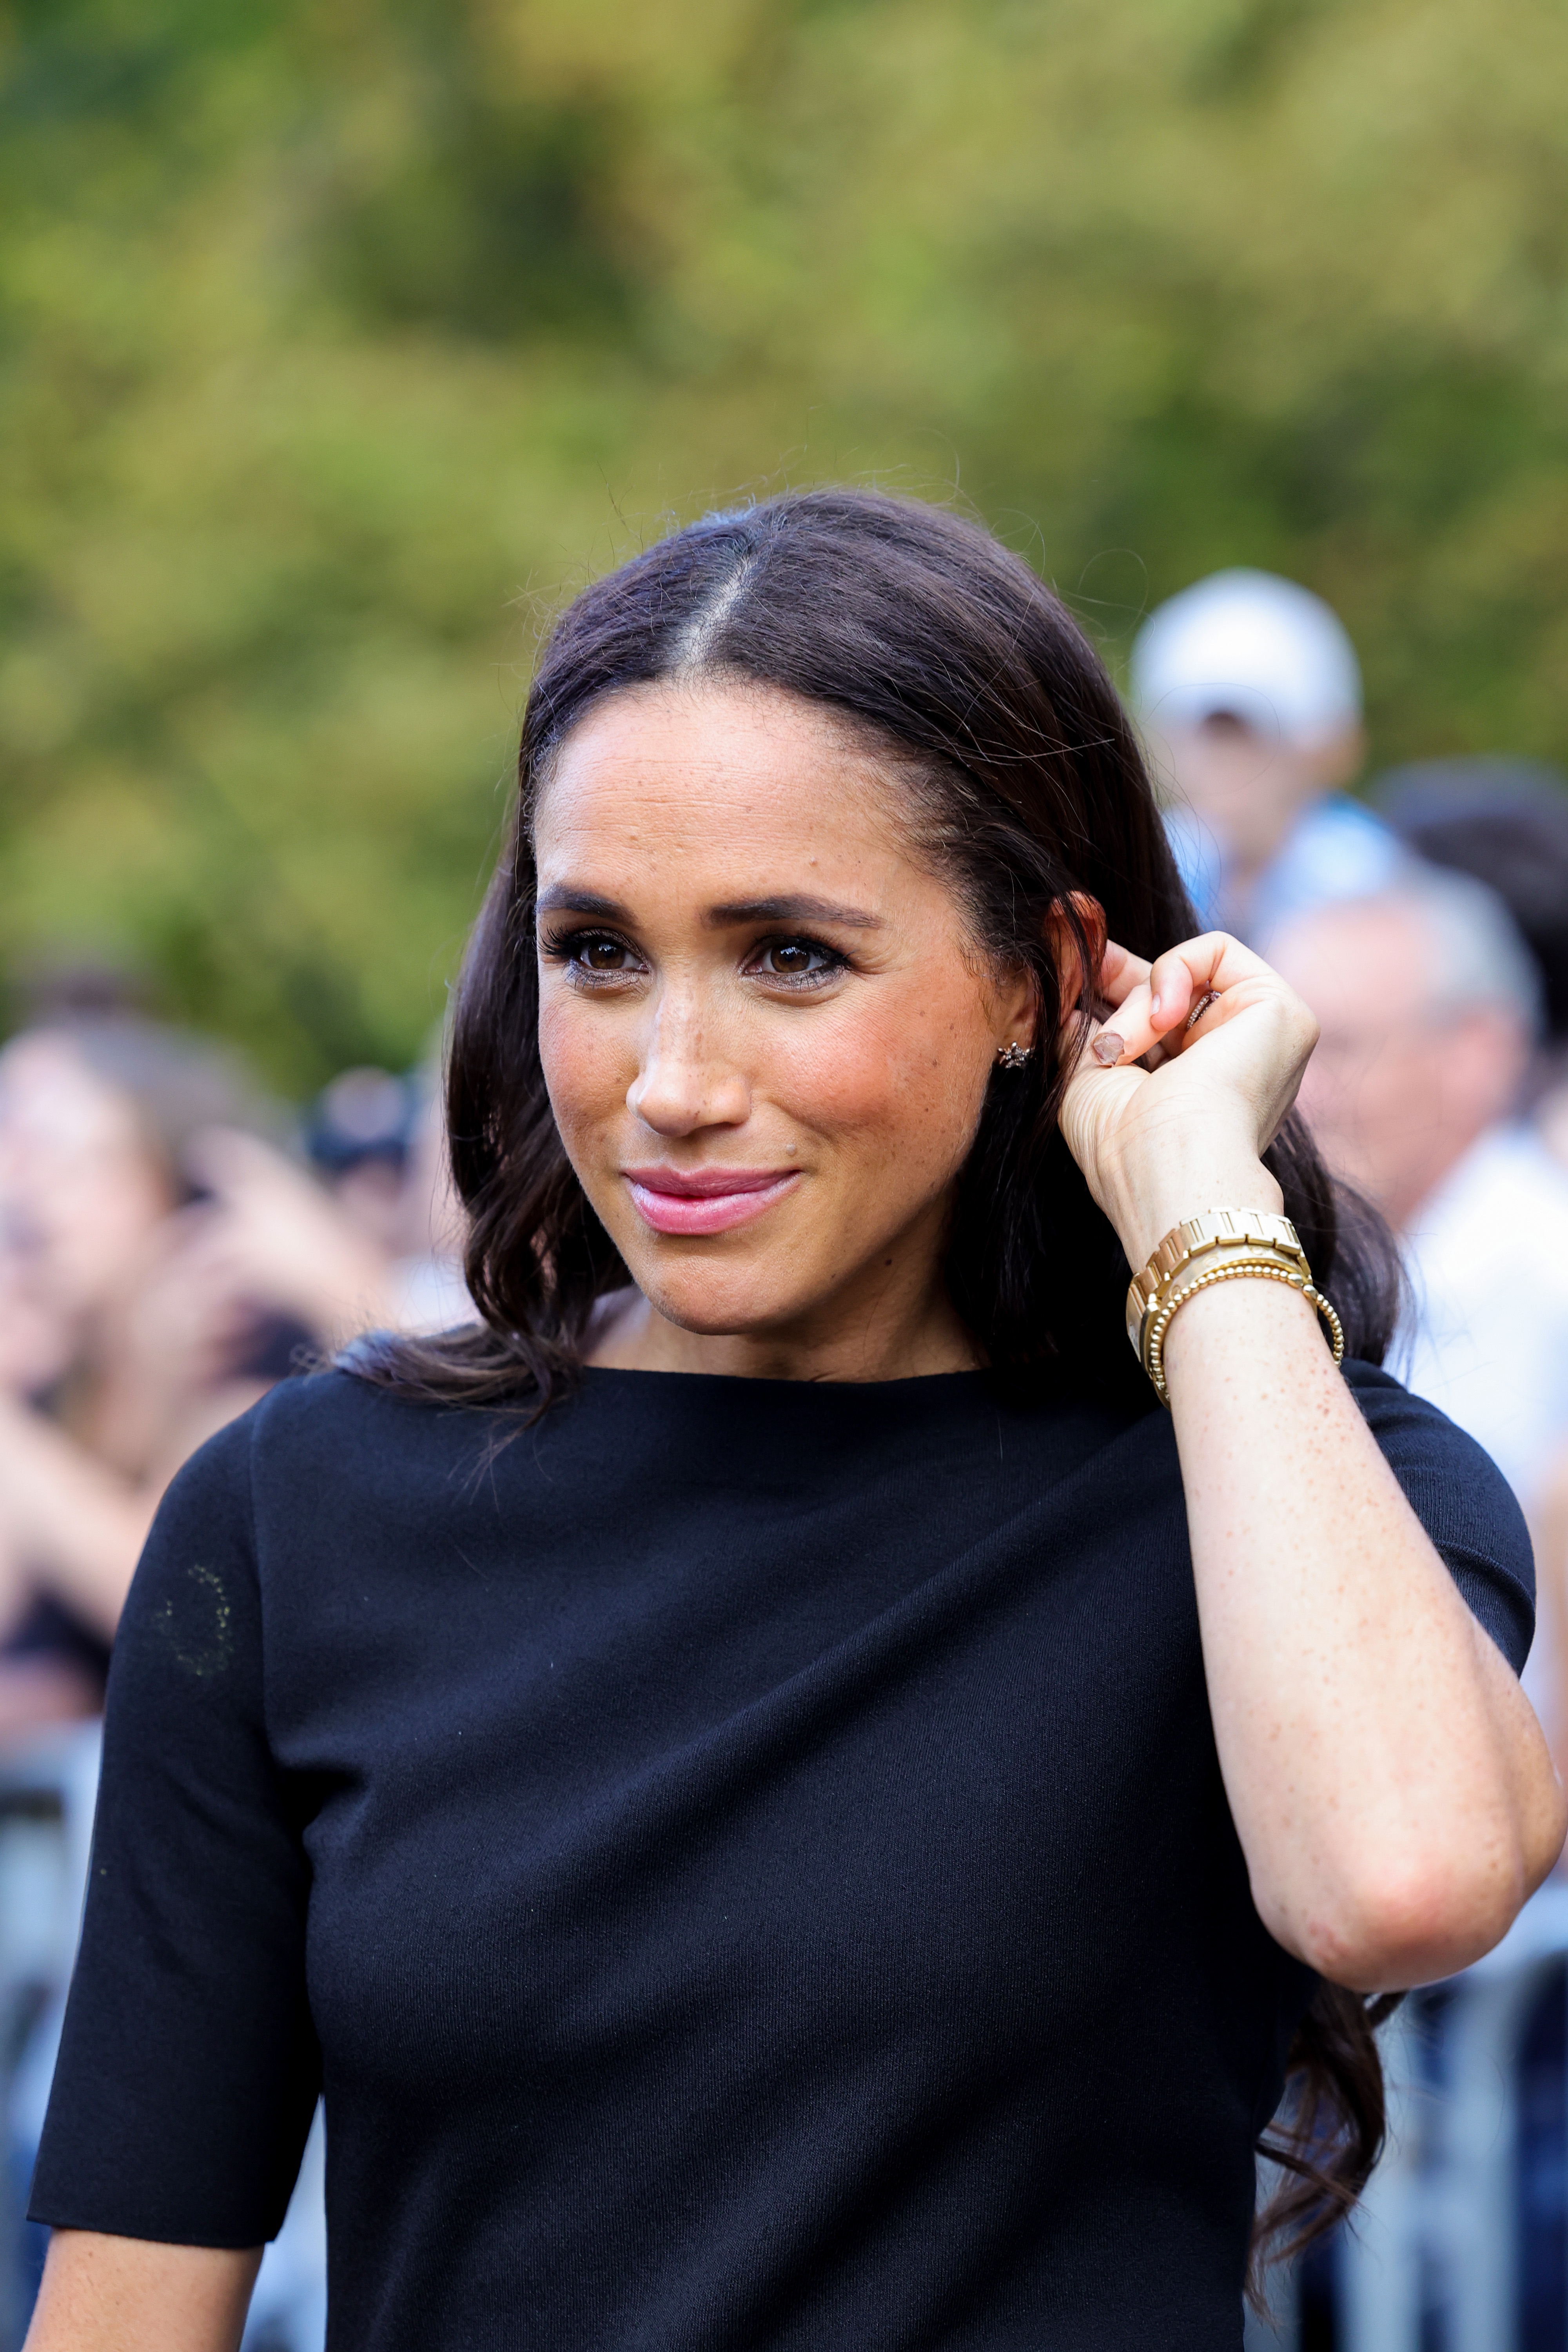 Meghan Markle, Duchess of Sussex in Windsor, England on September 10, 2022 | Source: Getty Images